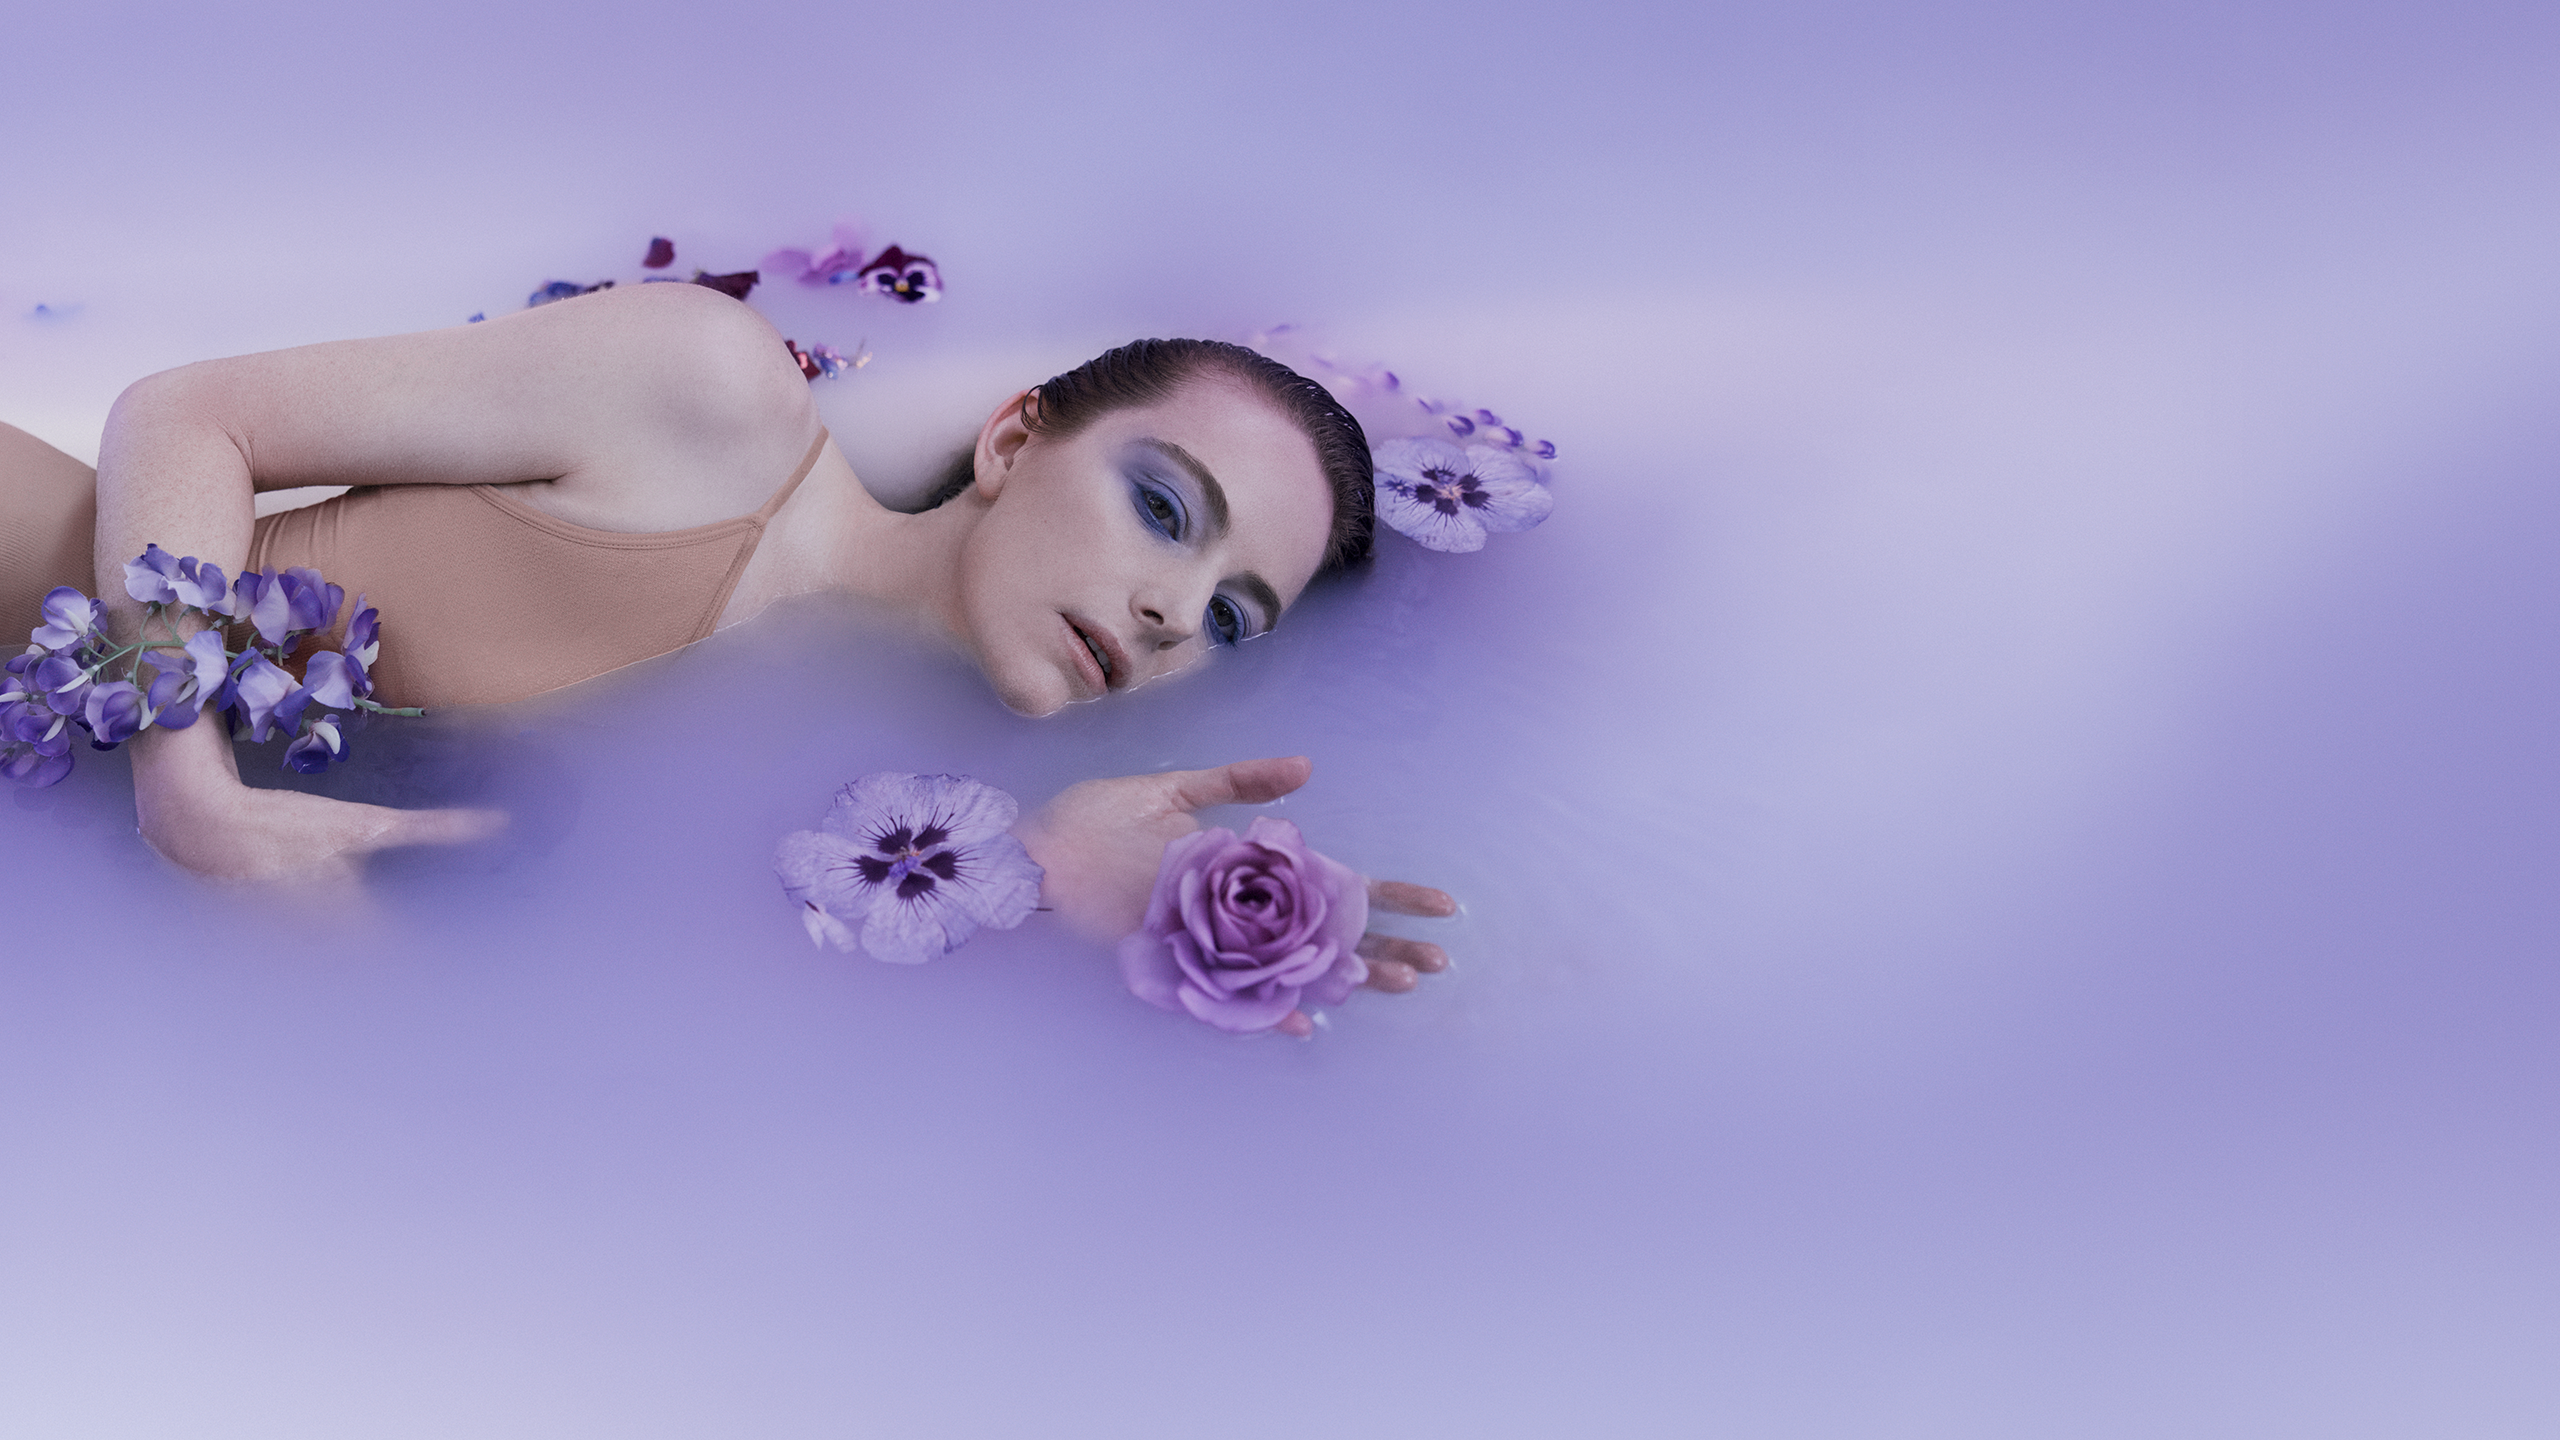 A woman lies in a milky pool of water, surrounded by purple flowers.